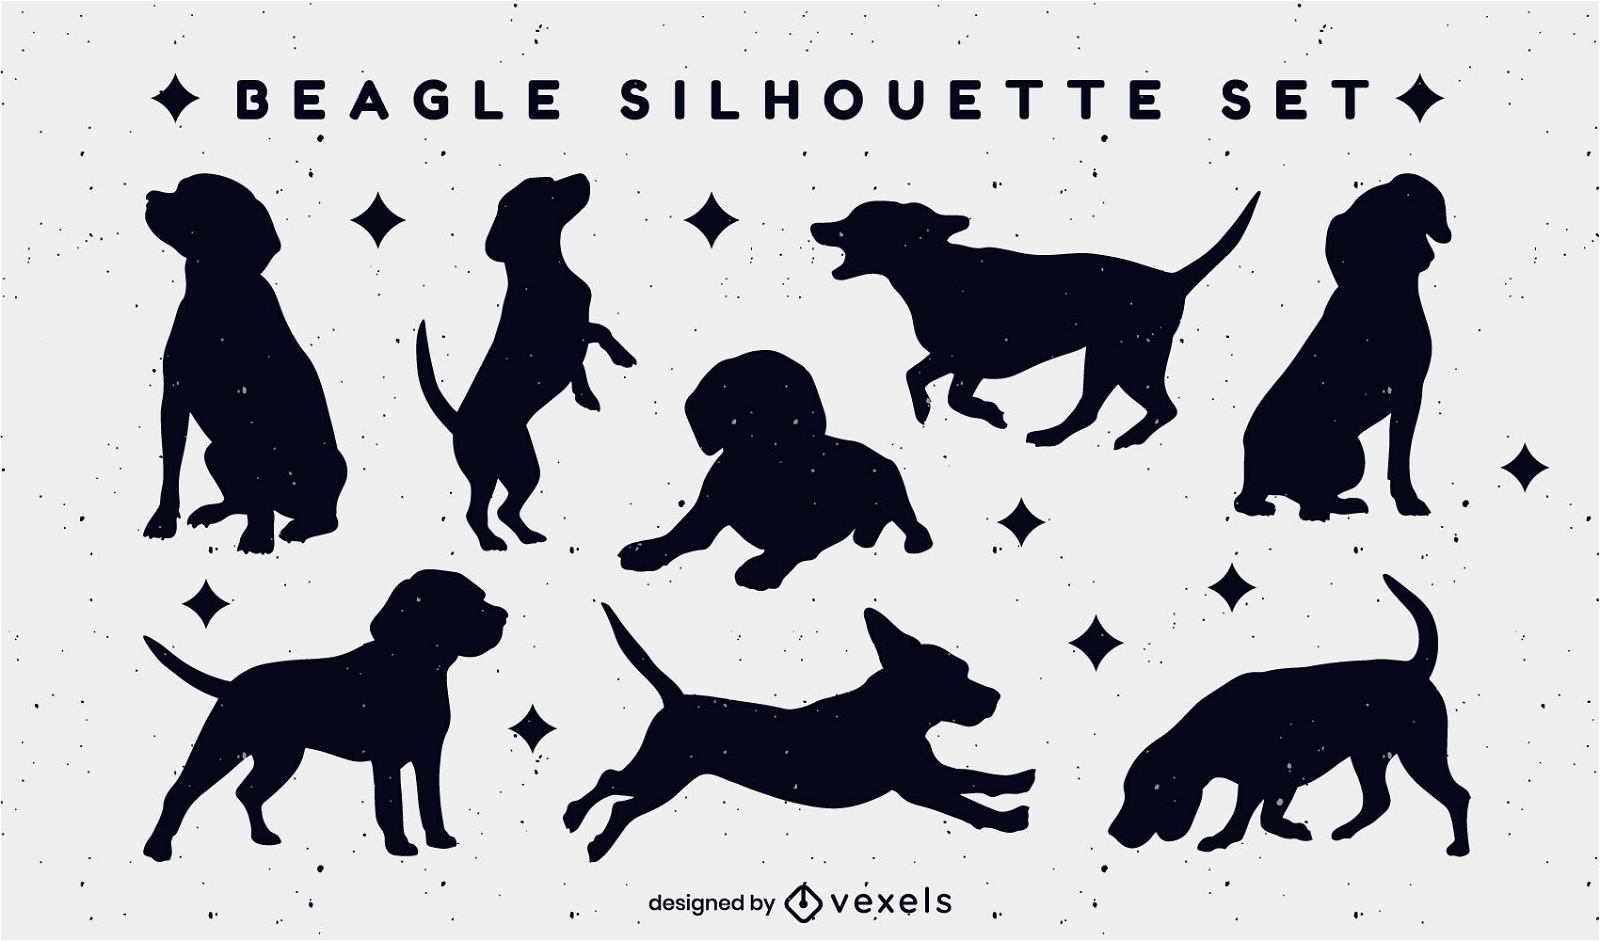 Beagle-hundetiere niedliches silhouettenset